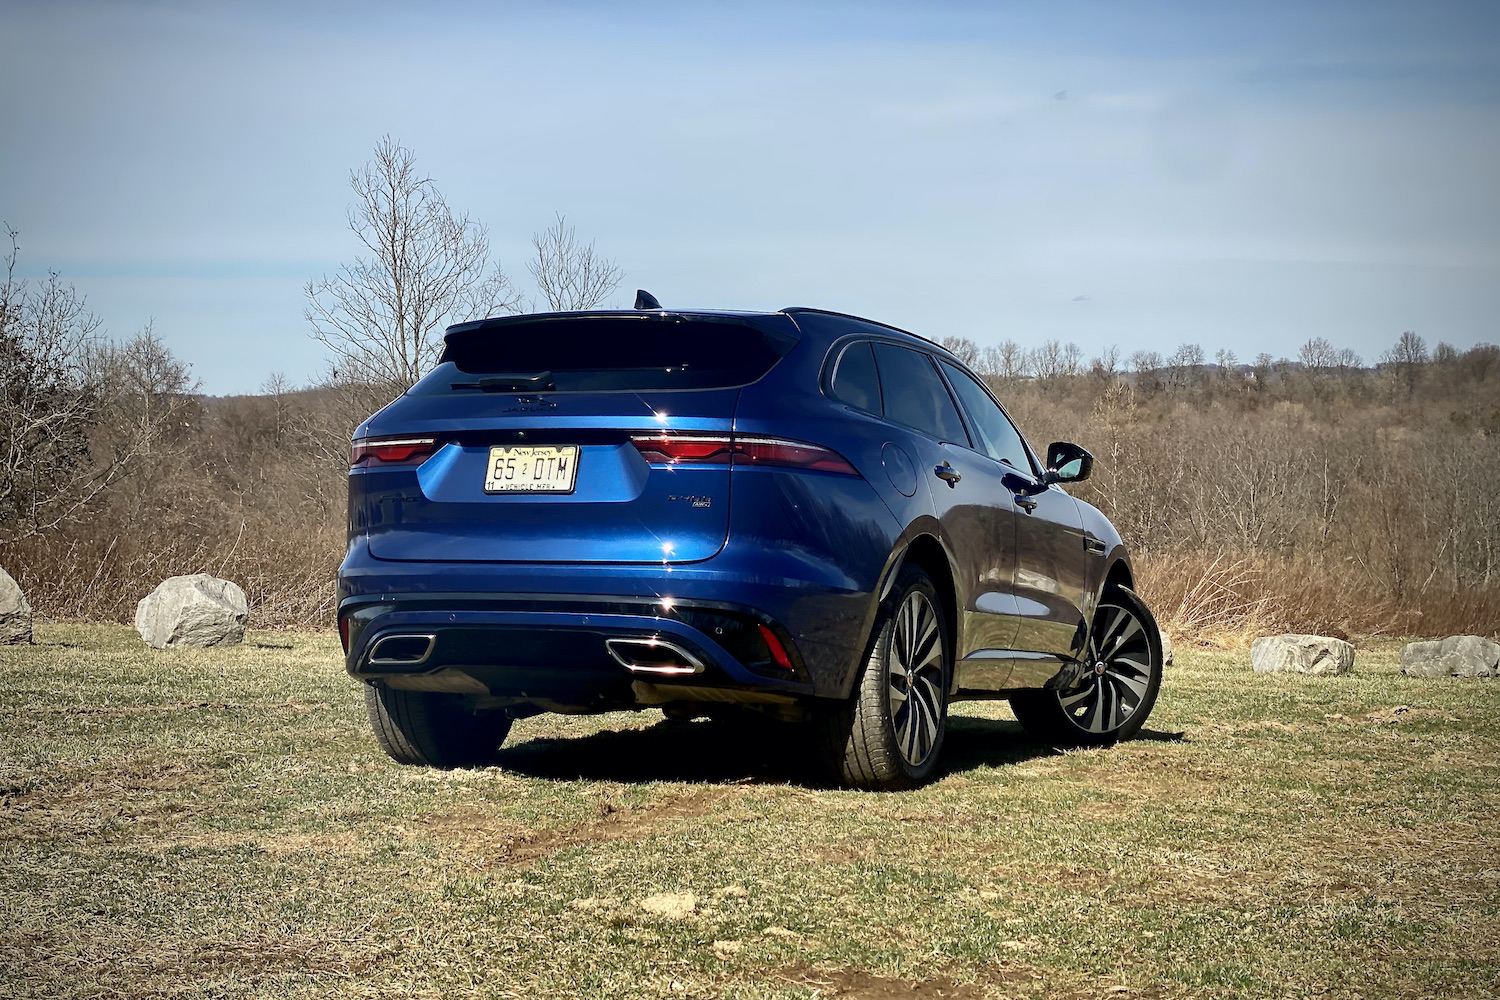 Rear end of 2022 Jaguar F-Pace R Dynamic S from passenger's side in a grassy field.